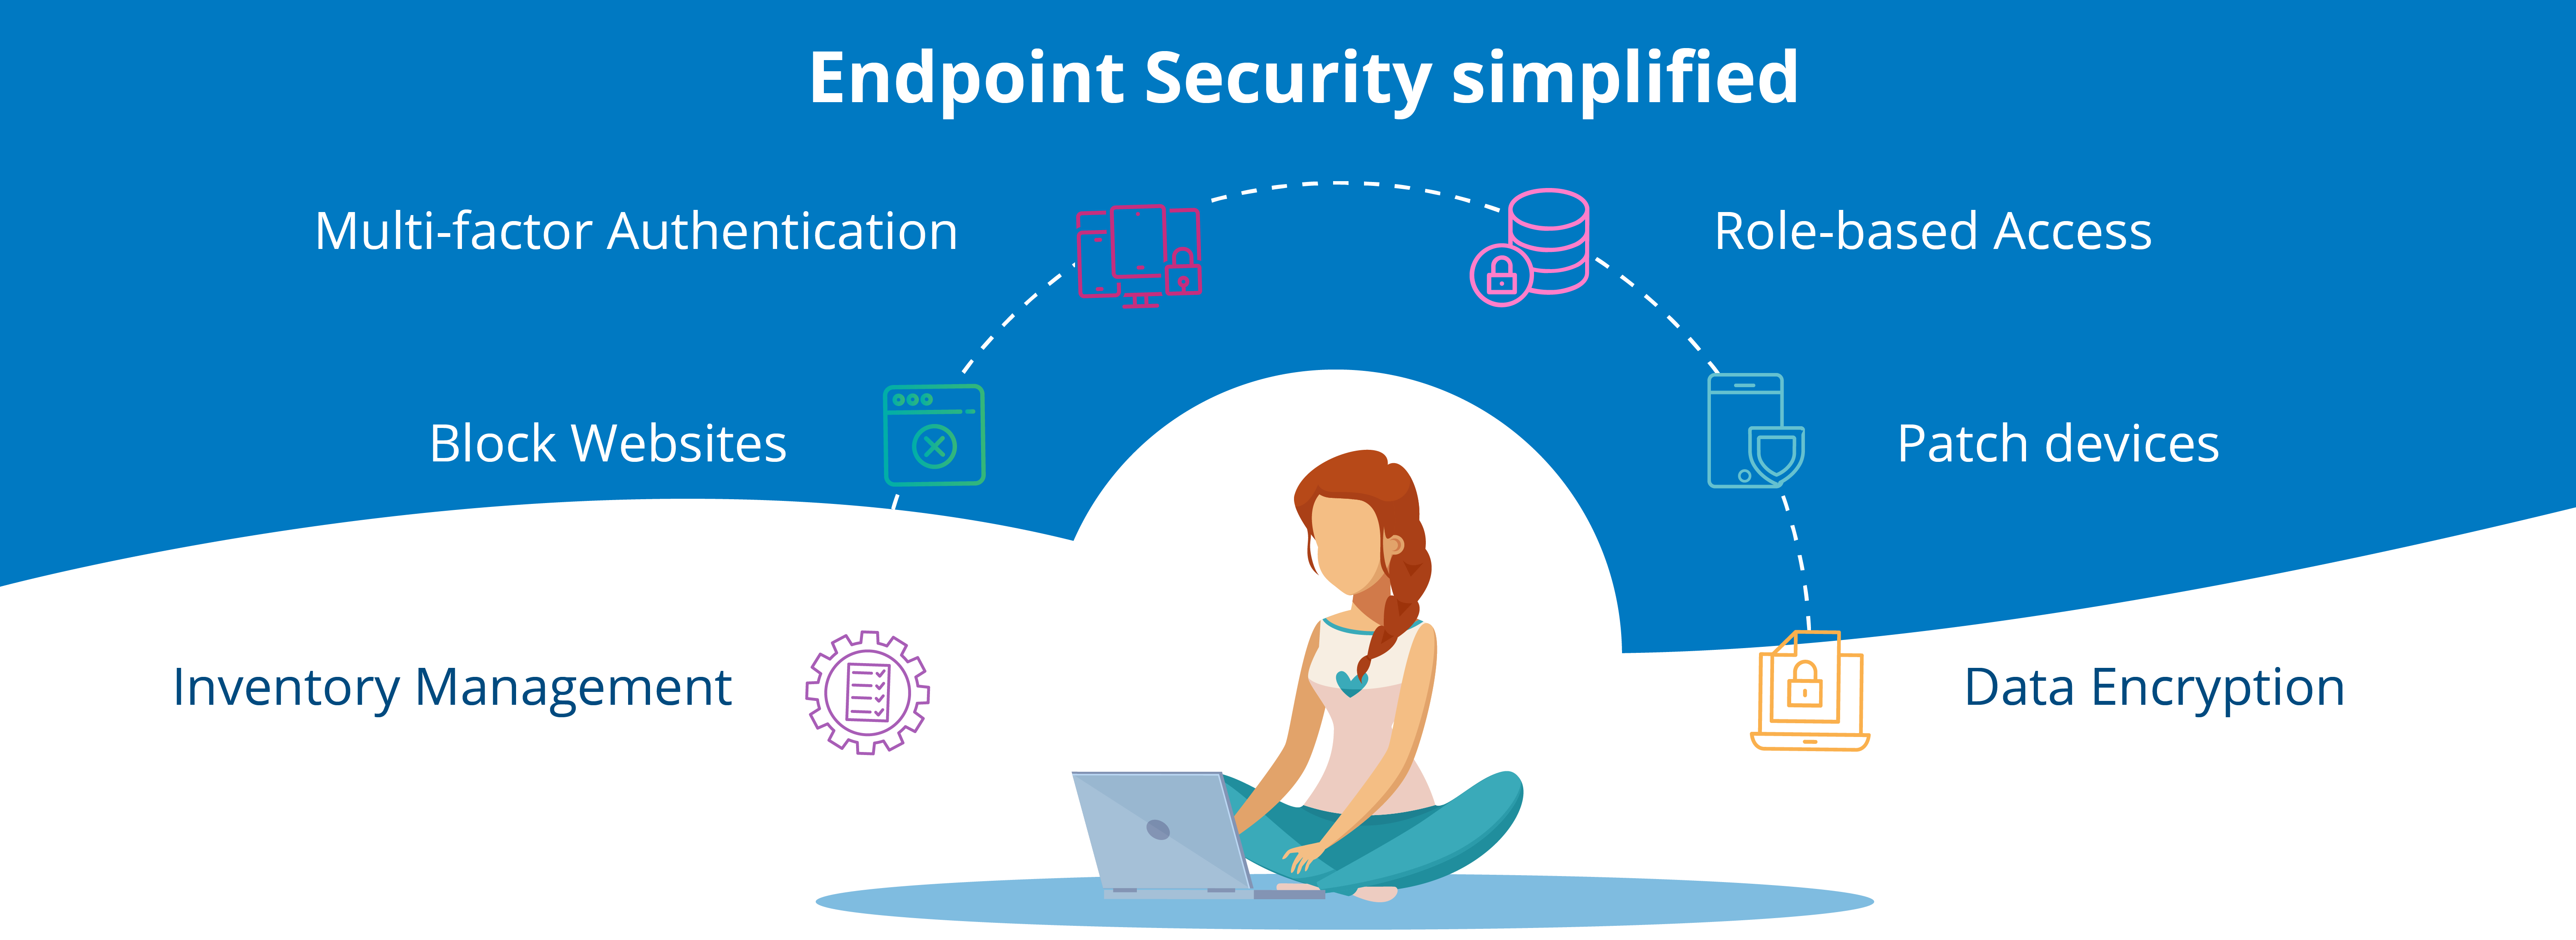 Endpoint Manager: A software solution that helps manage and secure endpoints
Third-Party Security Software: Antivirus or firewall software installed on the computer